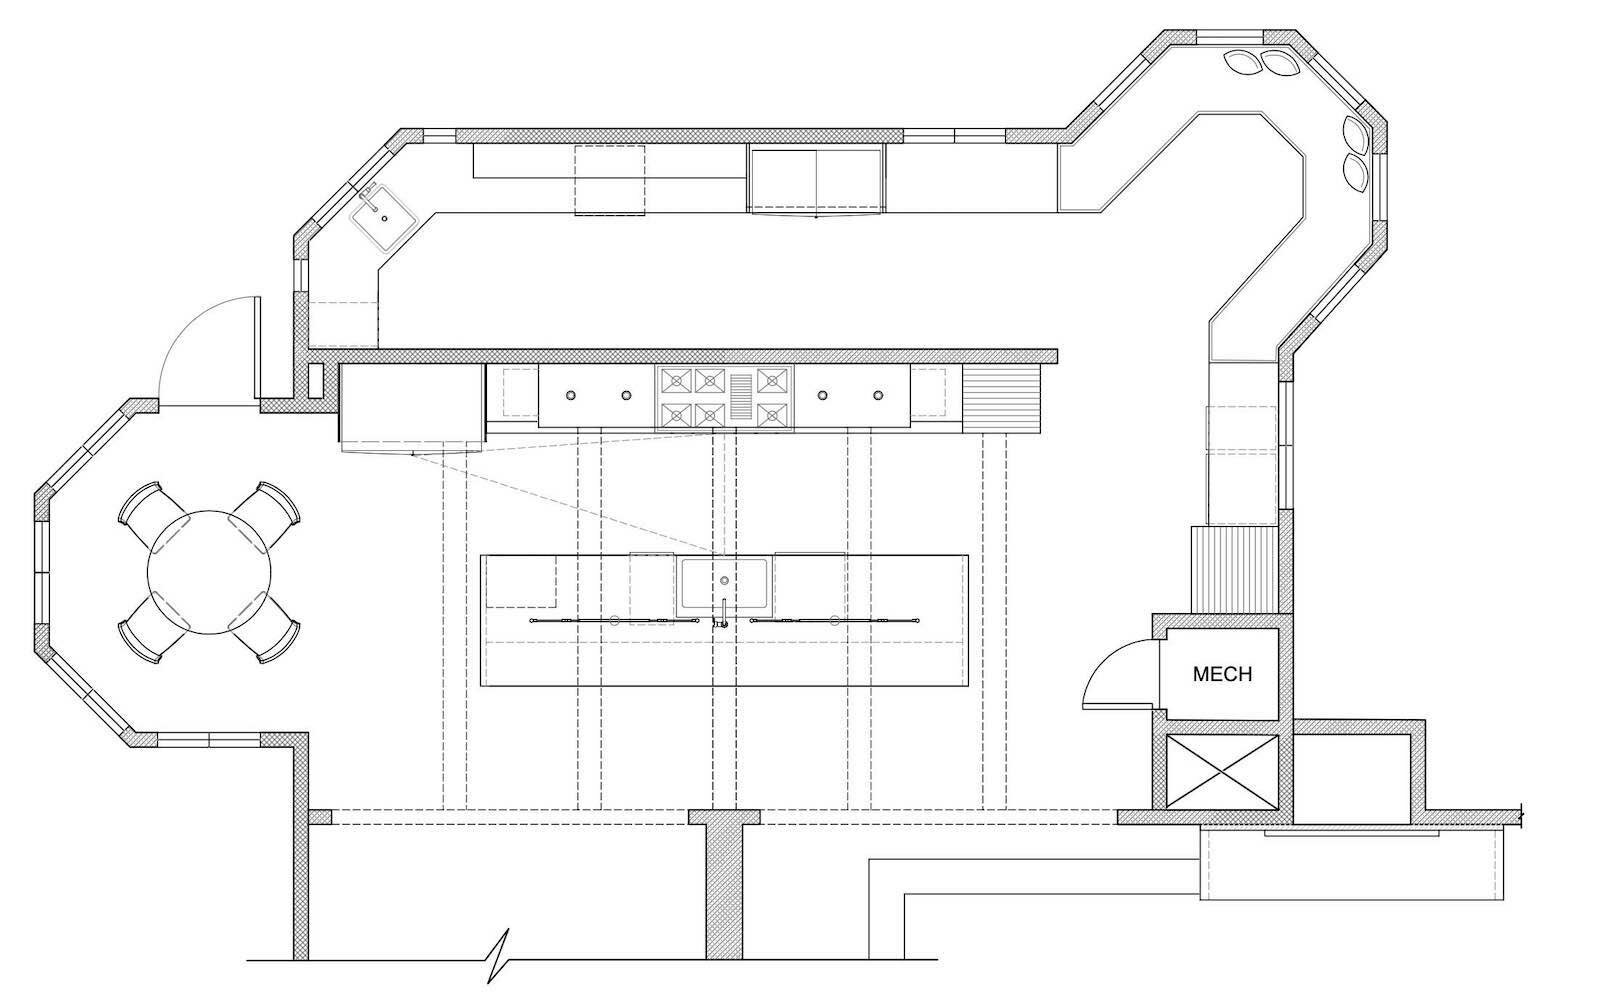 KITCHEN AND BUTLER'S PANTRY DESIGN PLANS AND PROGRESS